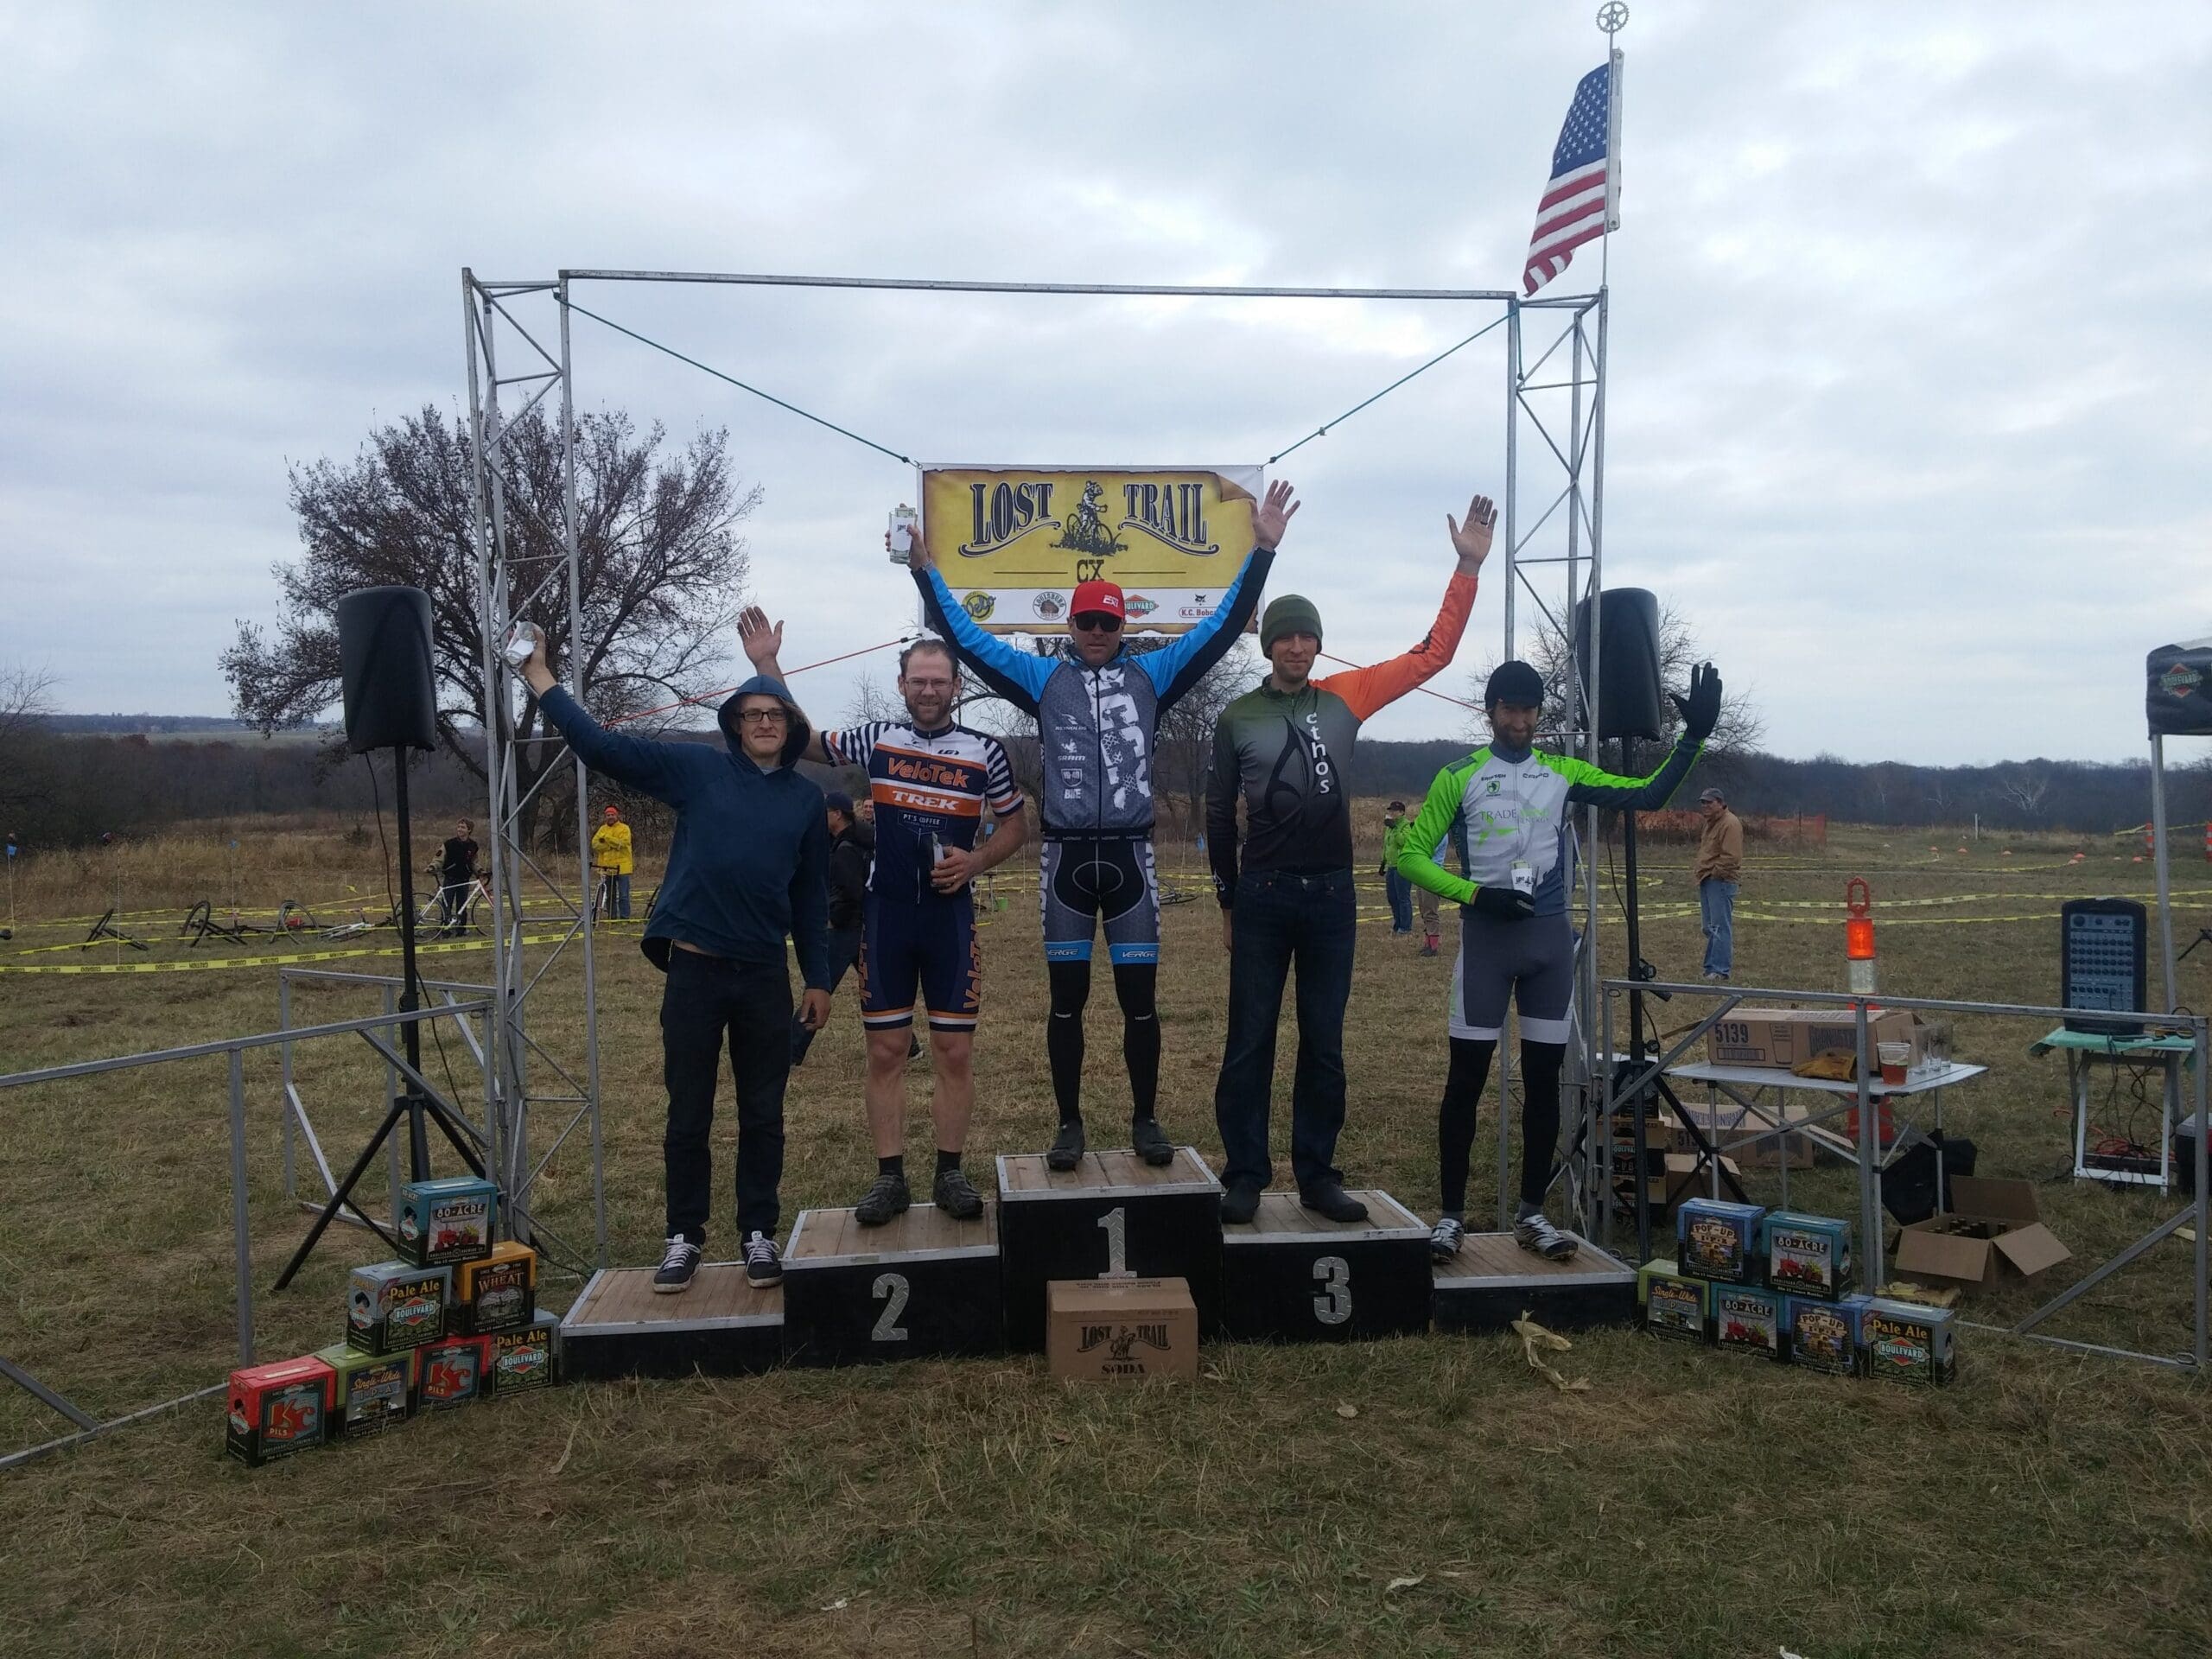 Lost Trail Cyclocross Results: Day 1